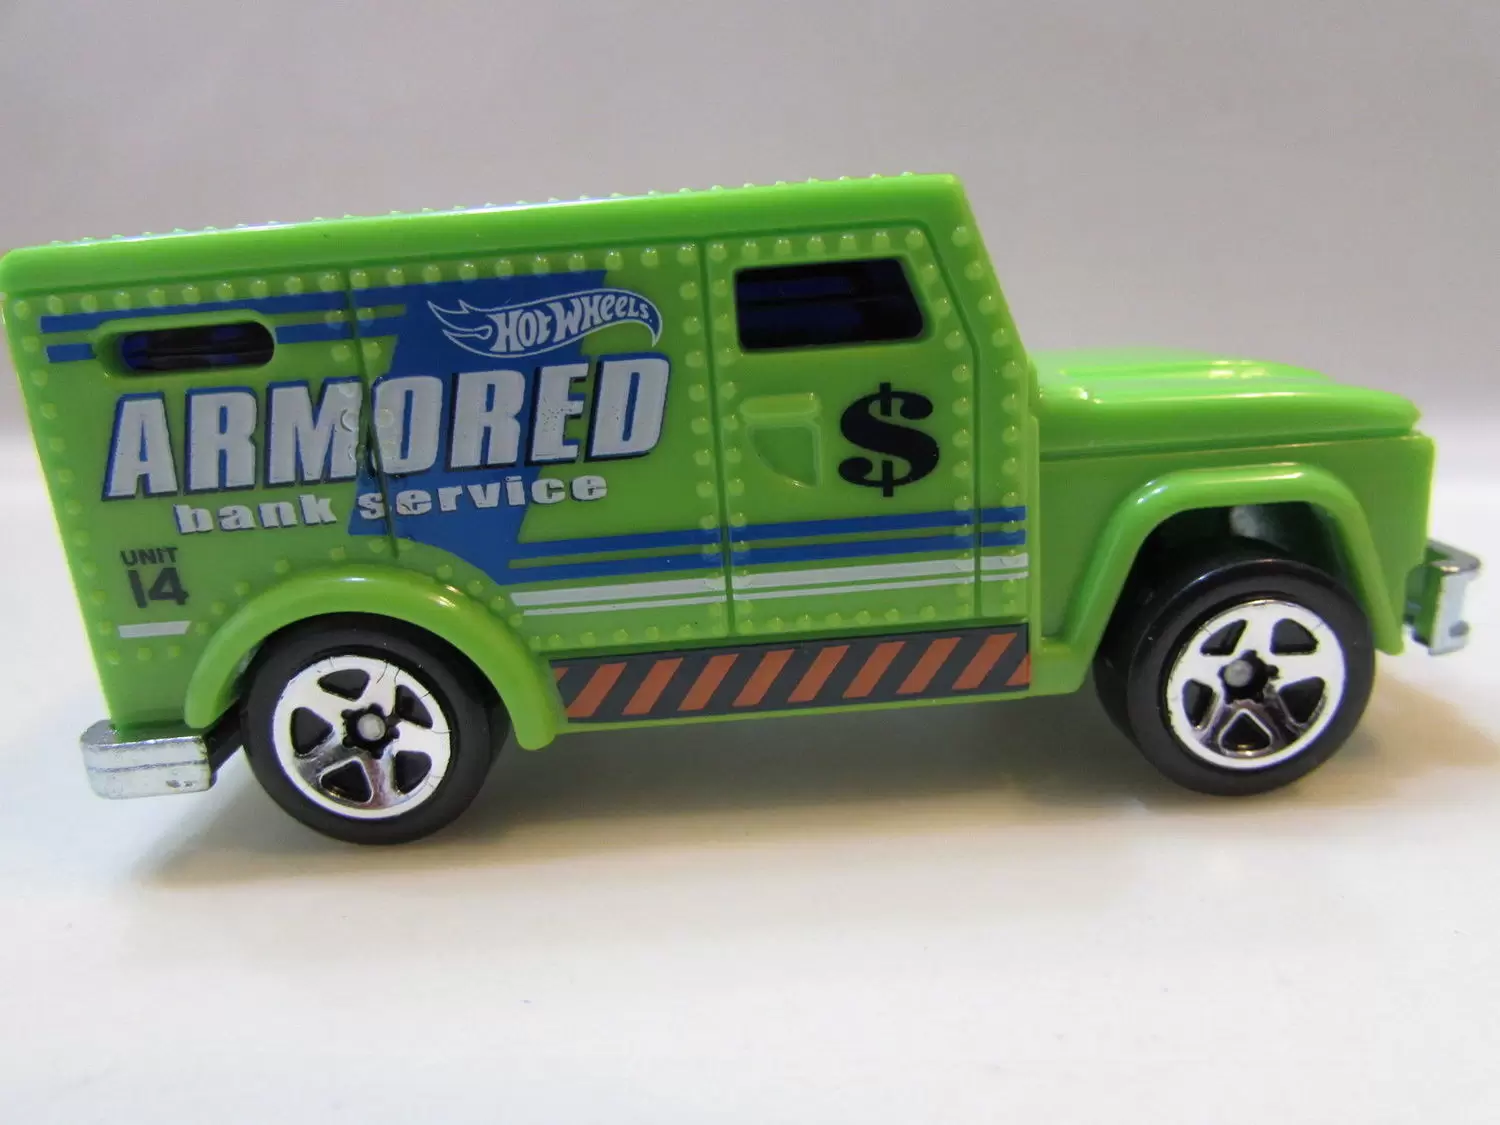 Mainline Hot Wheels - Armored Bank Service